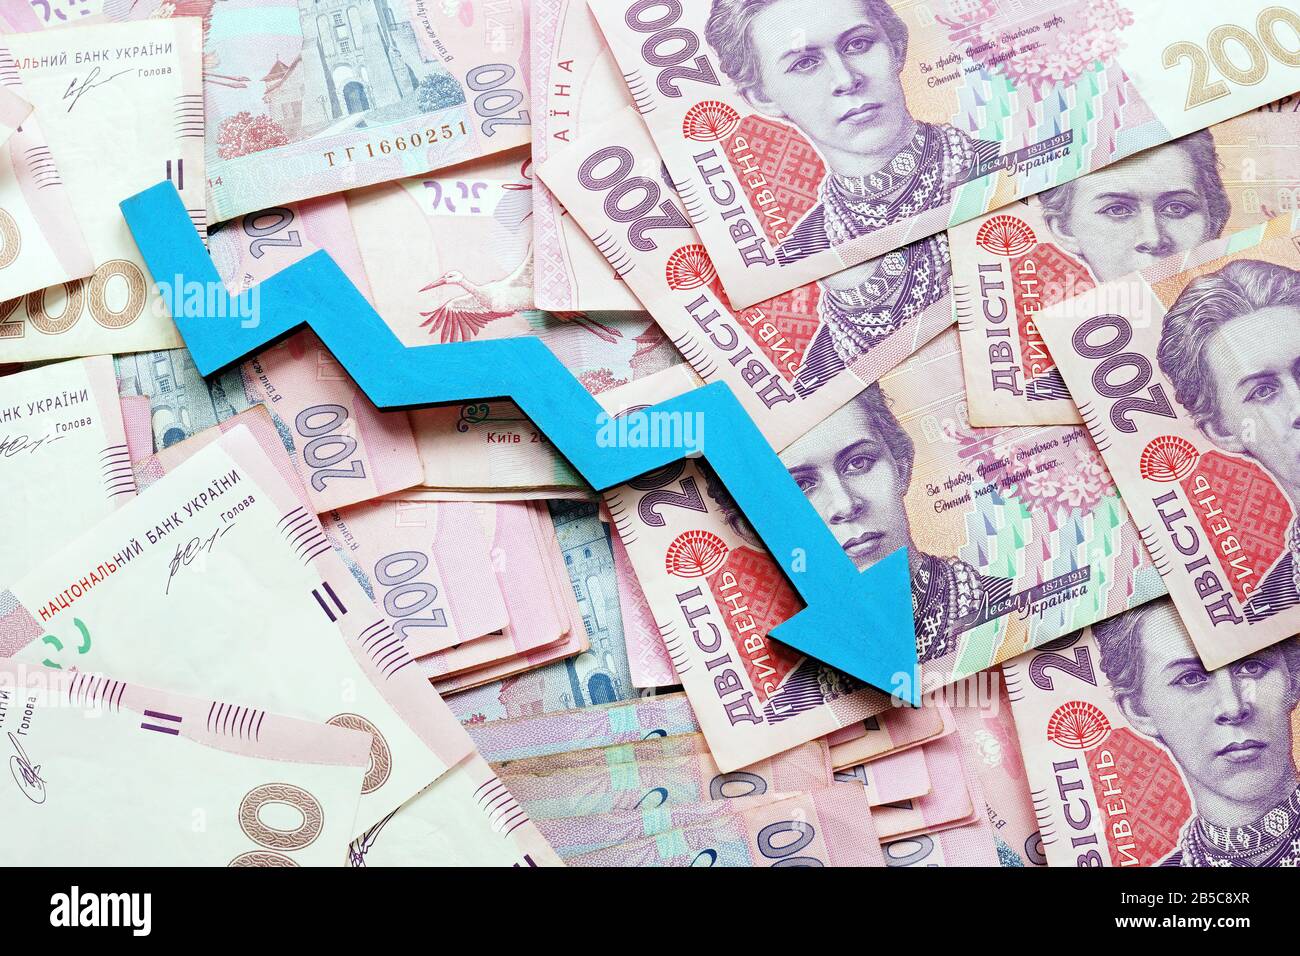 Ukrainian cash hryvnia and down arrow. The economic crisis and inflation. Stock Photo